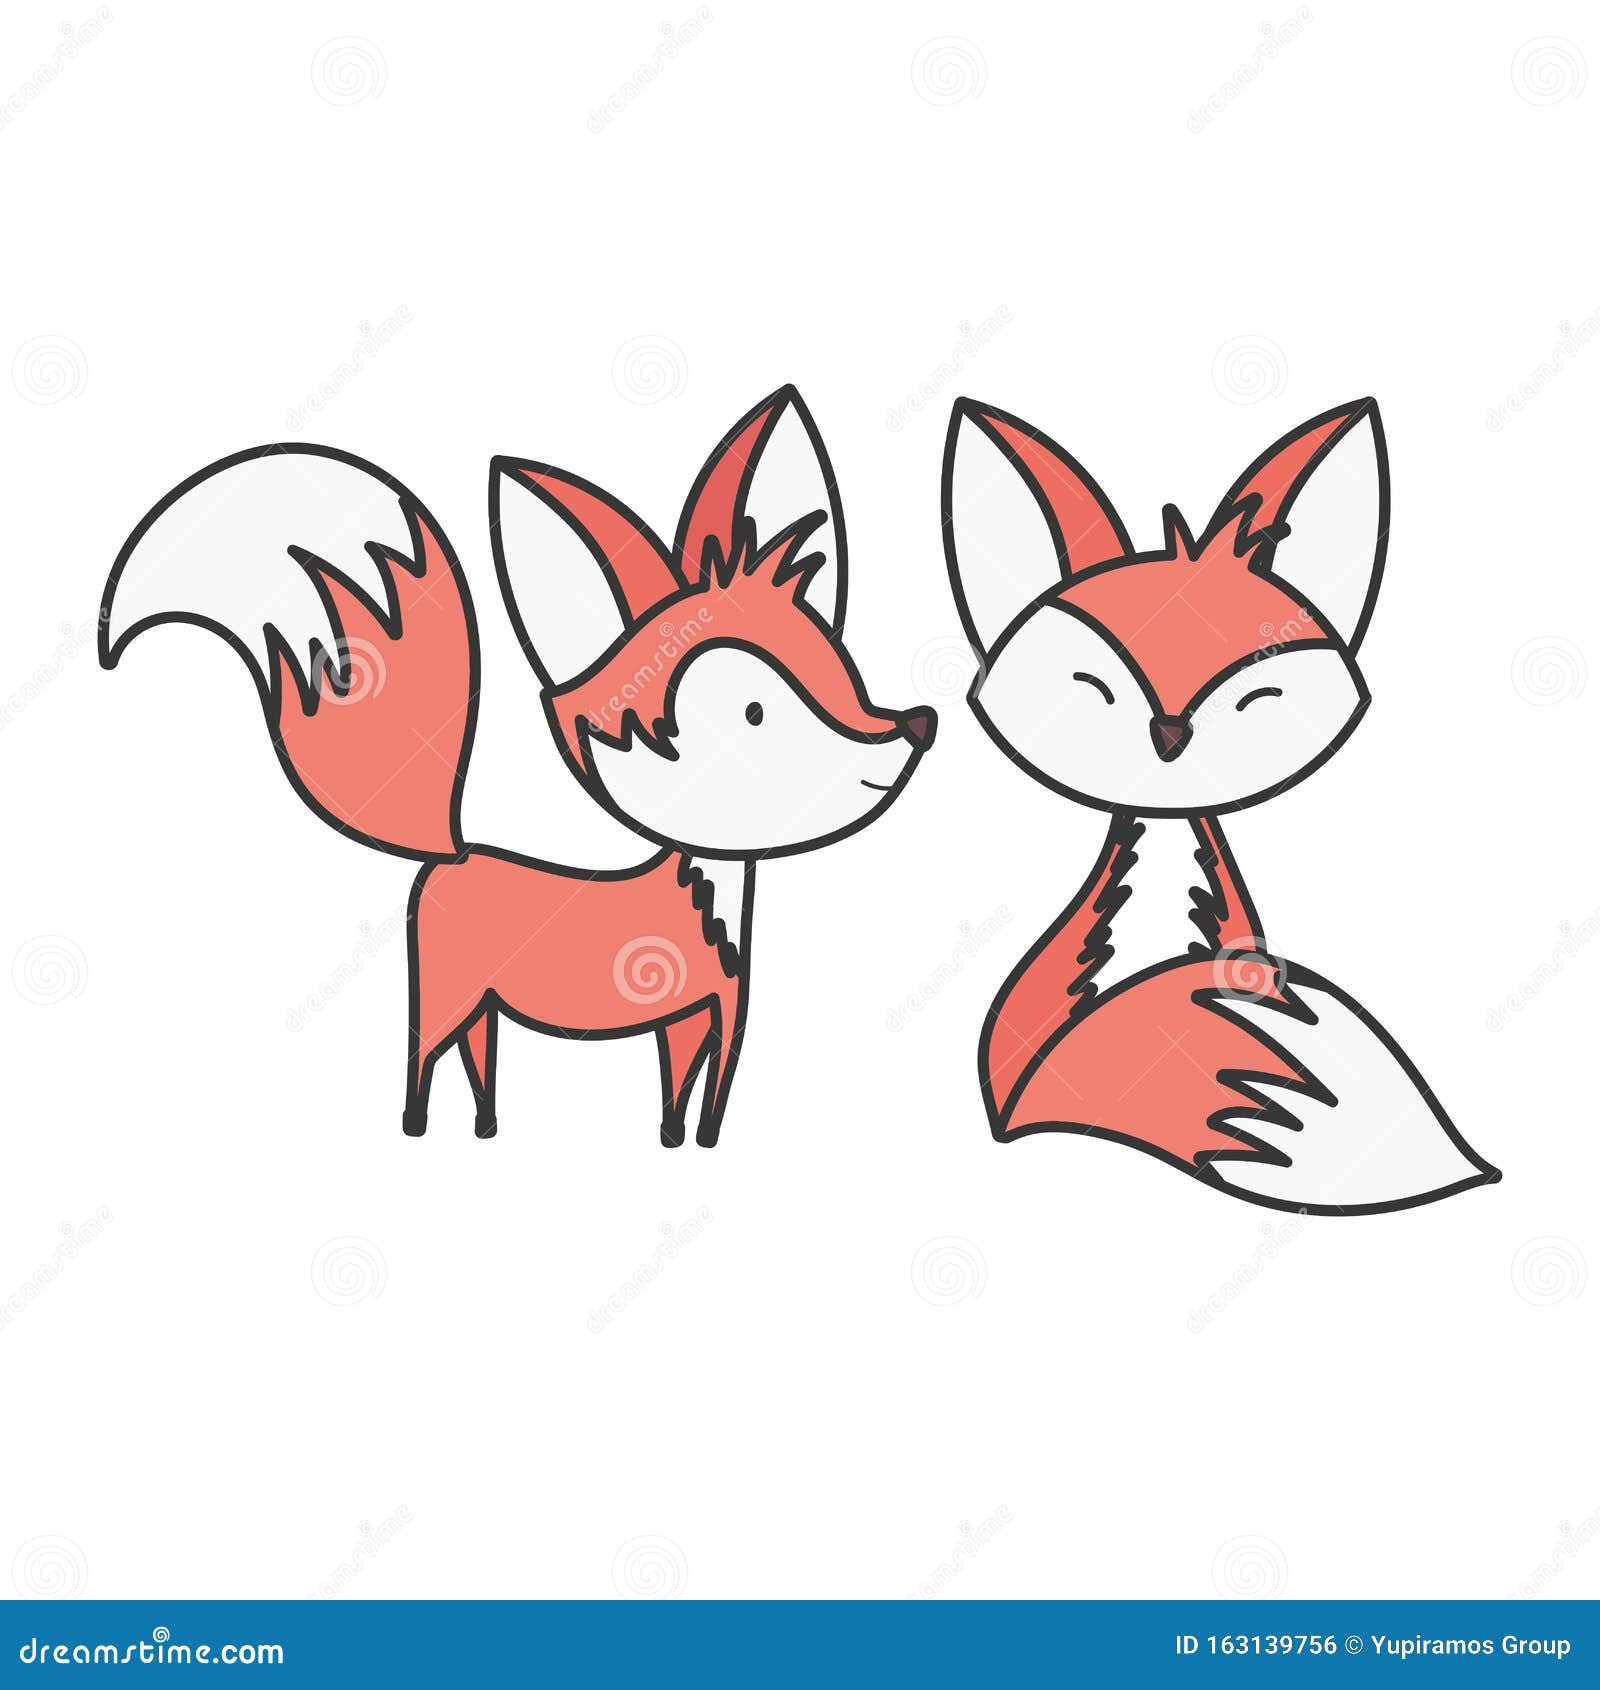 Cute Foxes Cartoon Animals on White Background Stock Vector ...